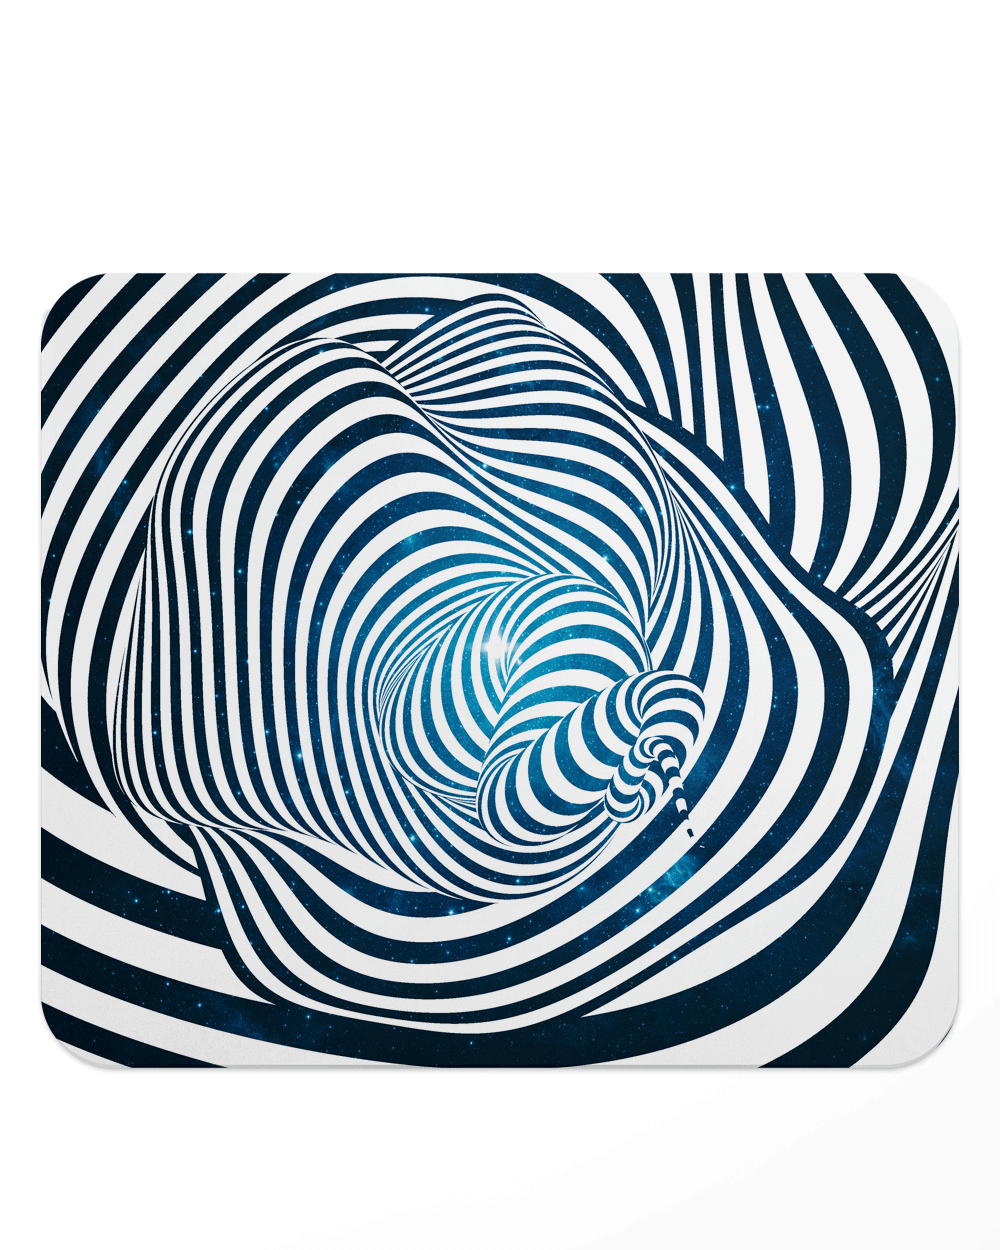 Space Mouse Pad with Nonslip Base (SIZE 8"x9")